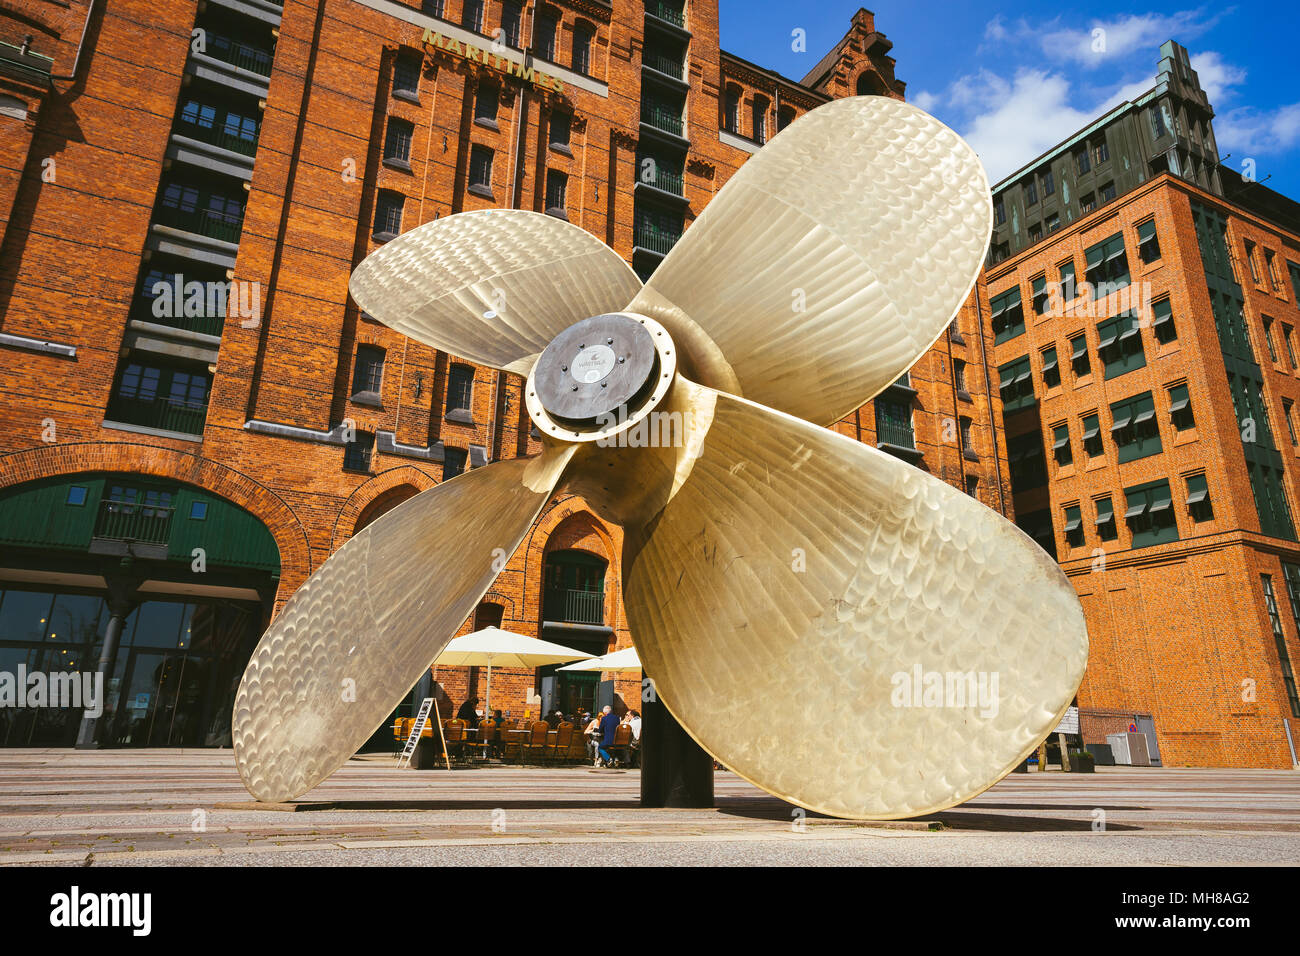 Hamburg, Germany - May 17, 2018: Giant four-blade ship propeller in front of the International Maritime Museum in Hamburg's Speicherstadt district. Stock Photo